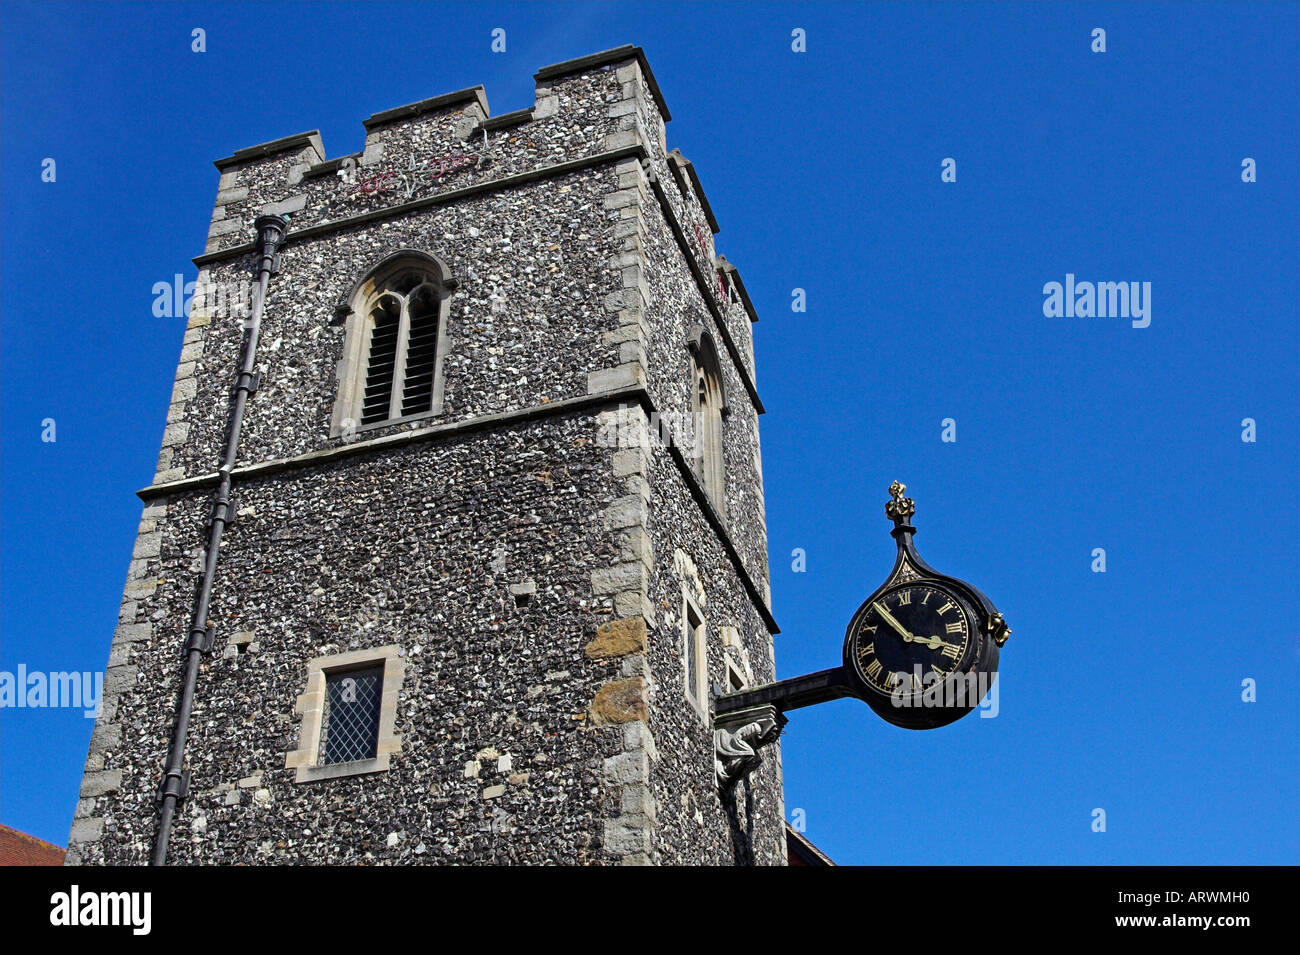 Clocktower Of The Church Of St George The Martyr In Canterbury In Kent In England Stock Photo